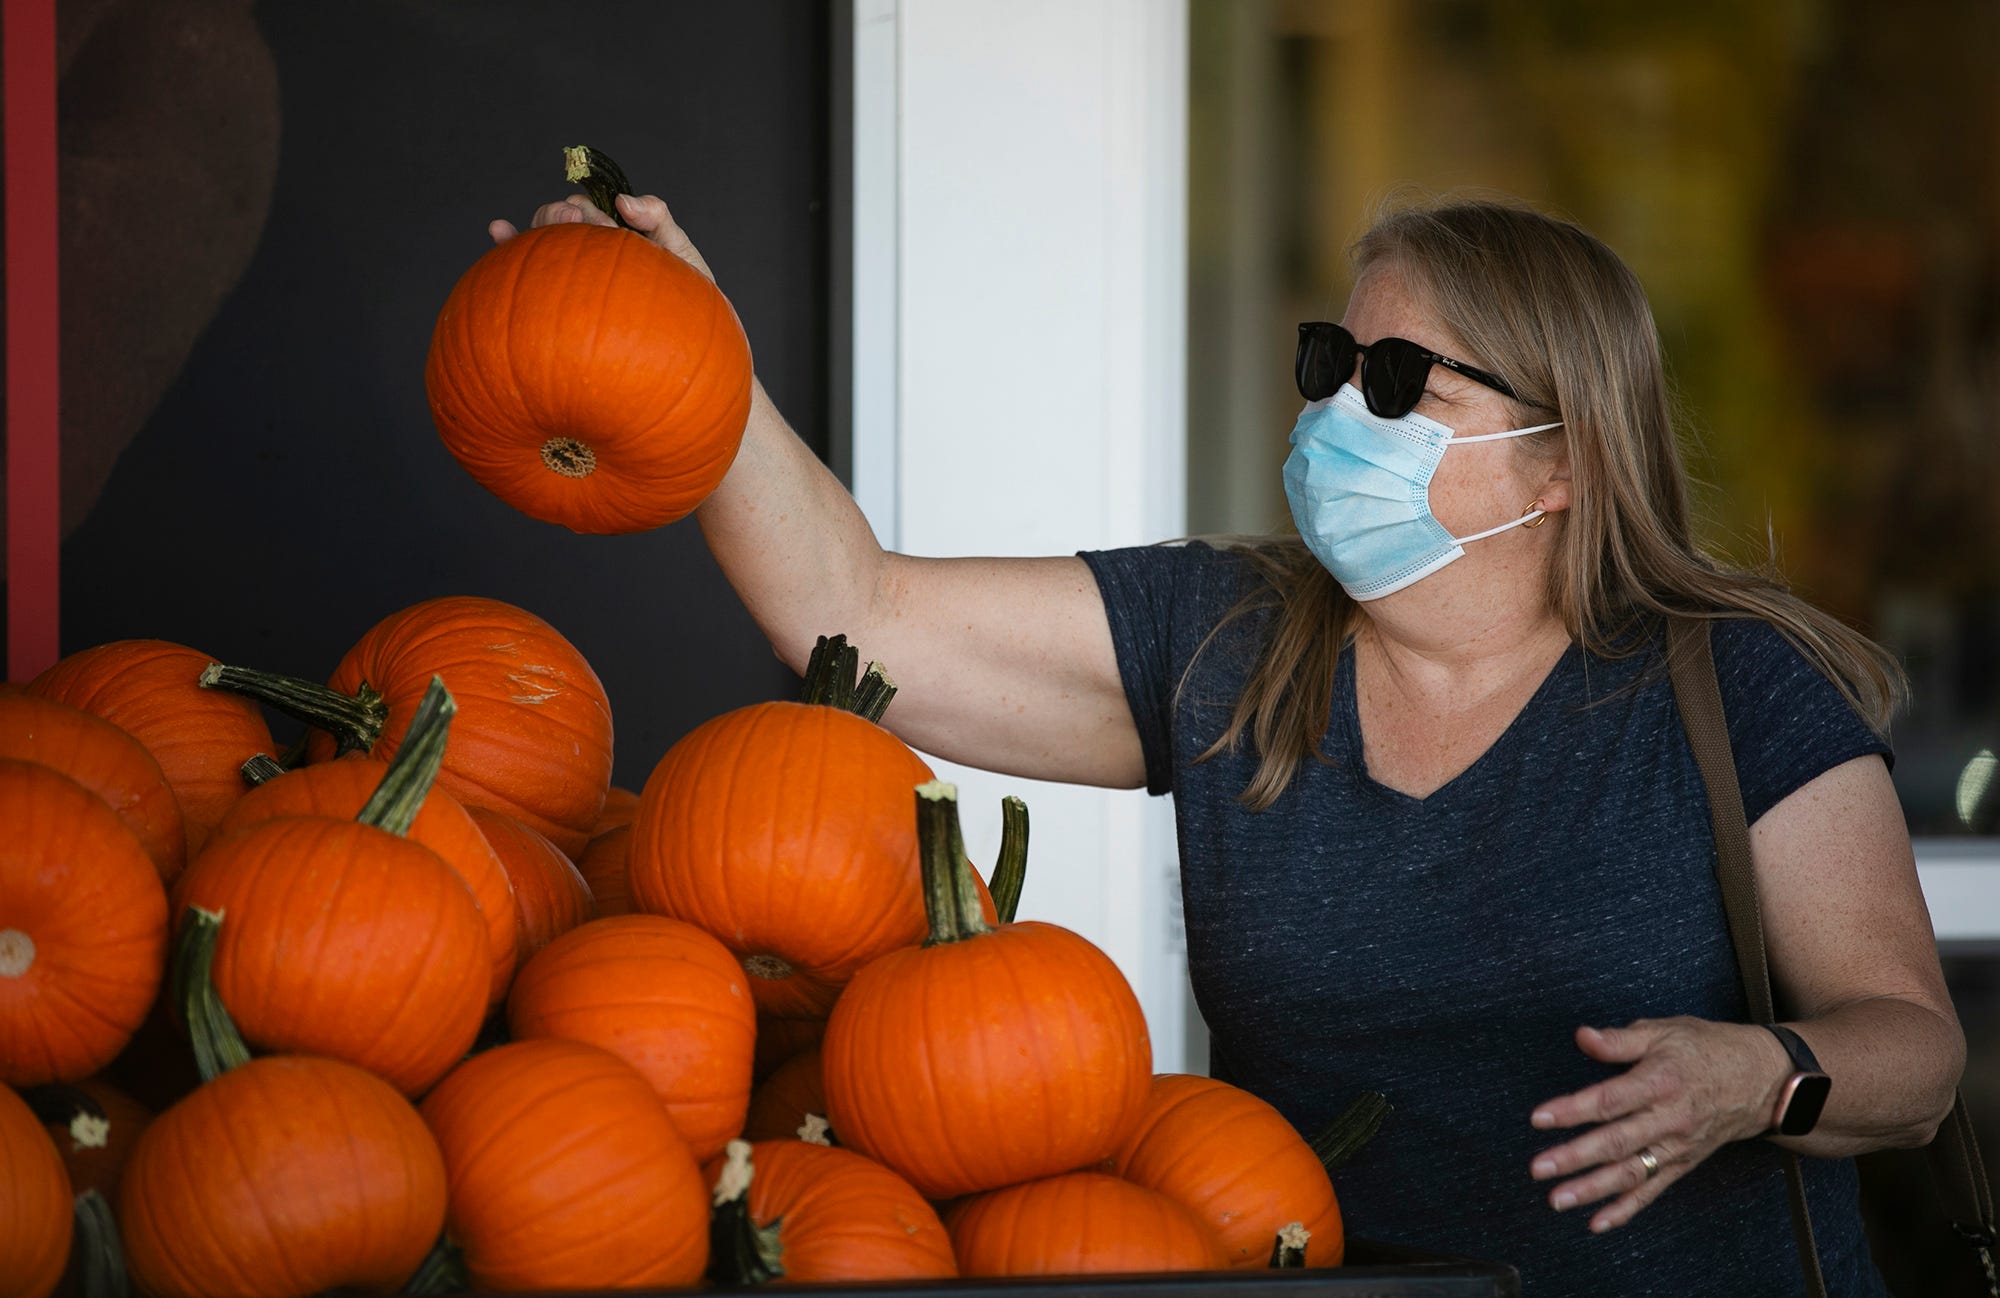 Halloween's over, so what's the best way to dispose of pumpkin shells?